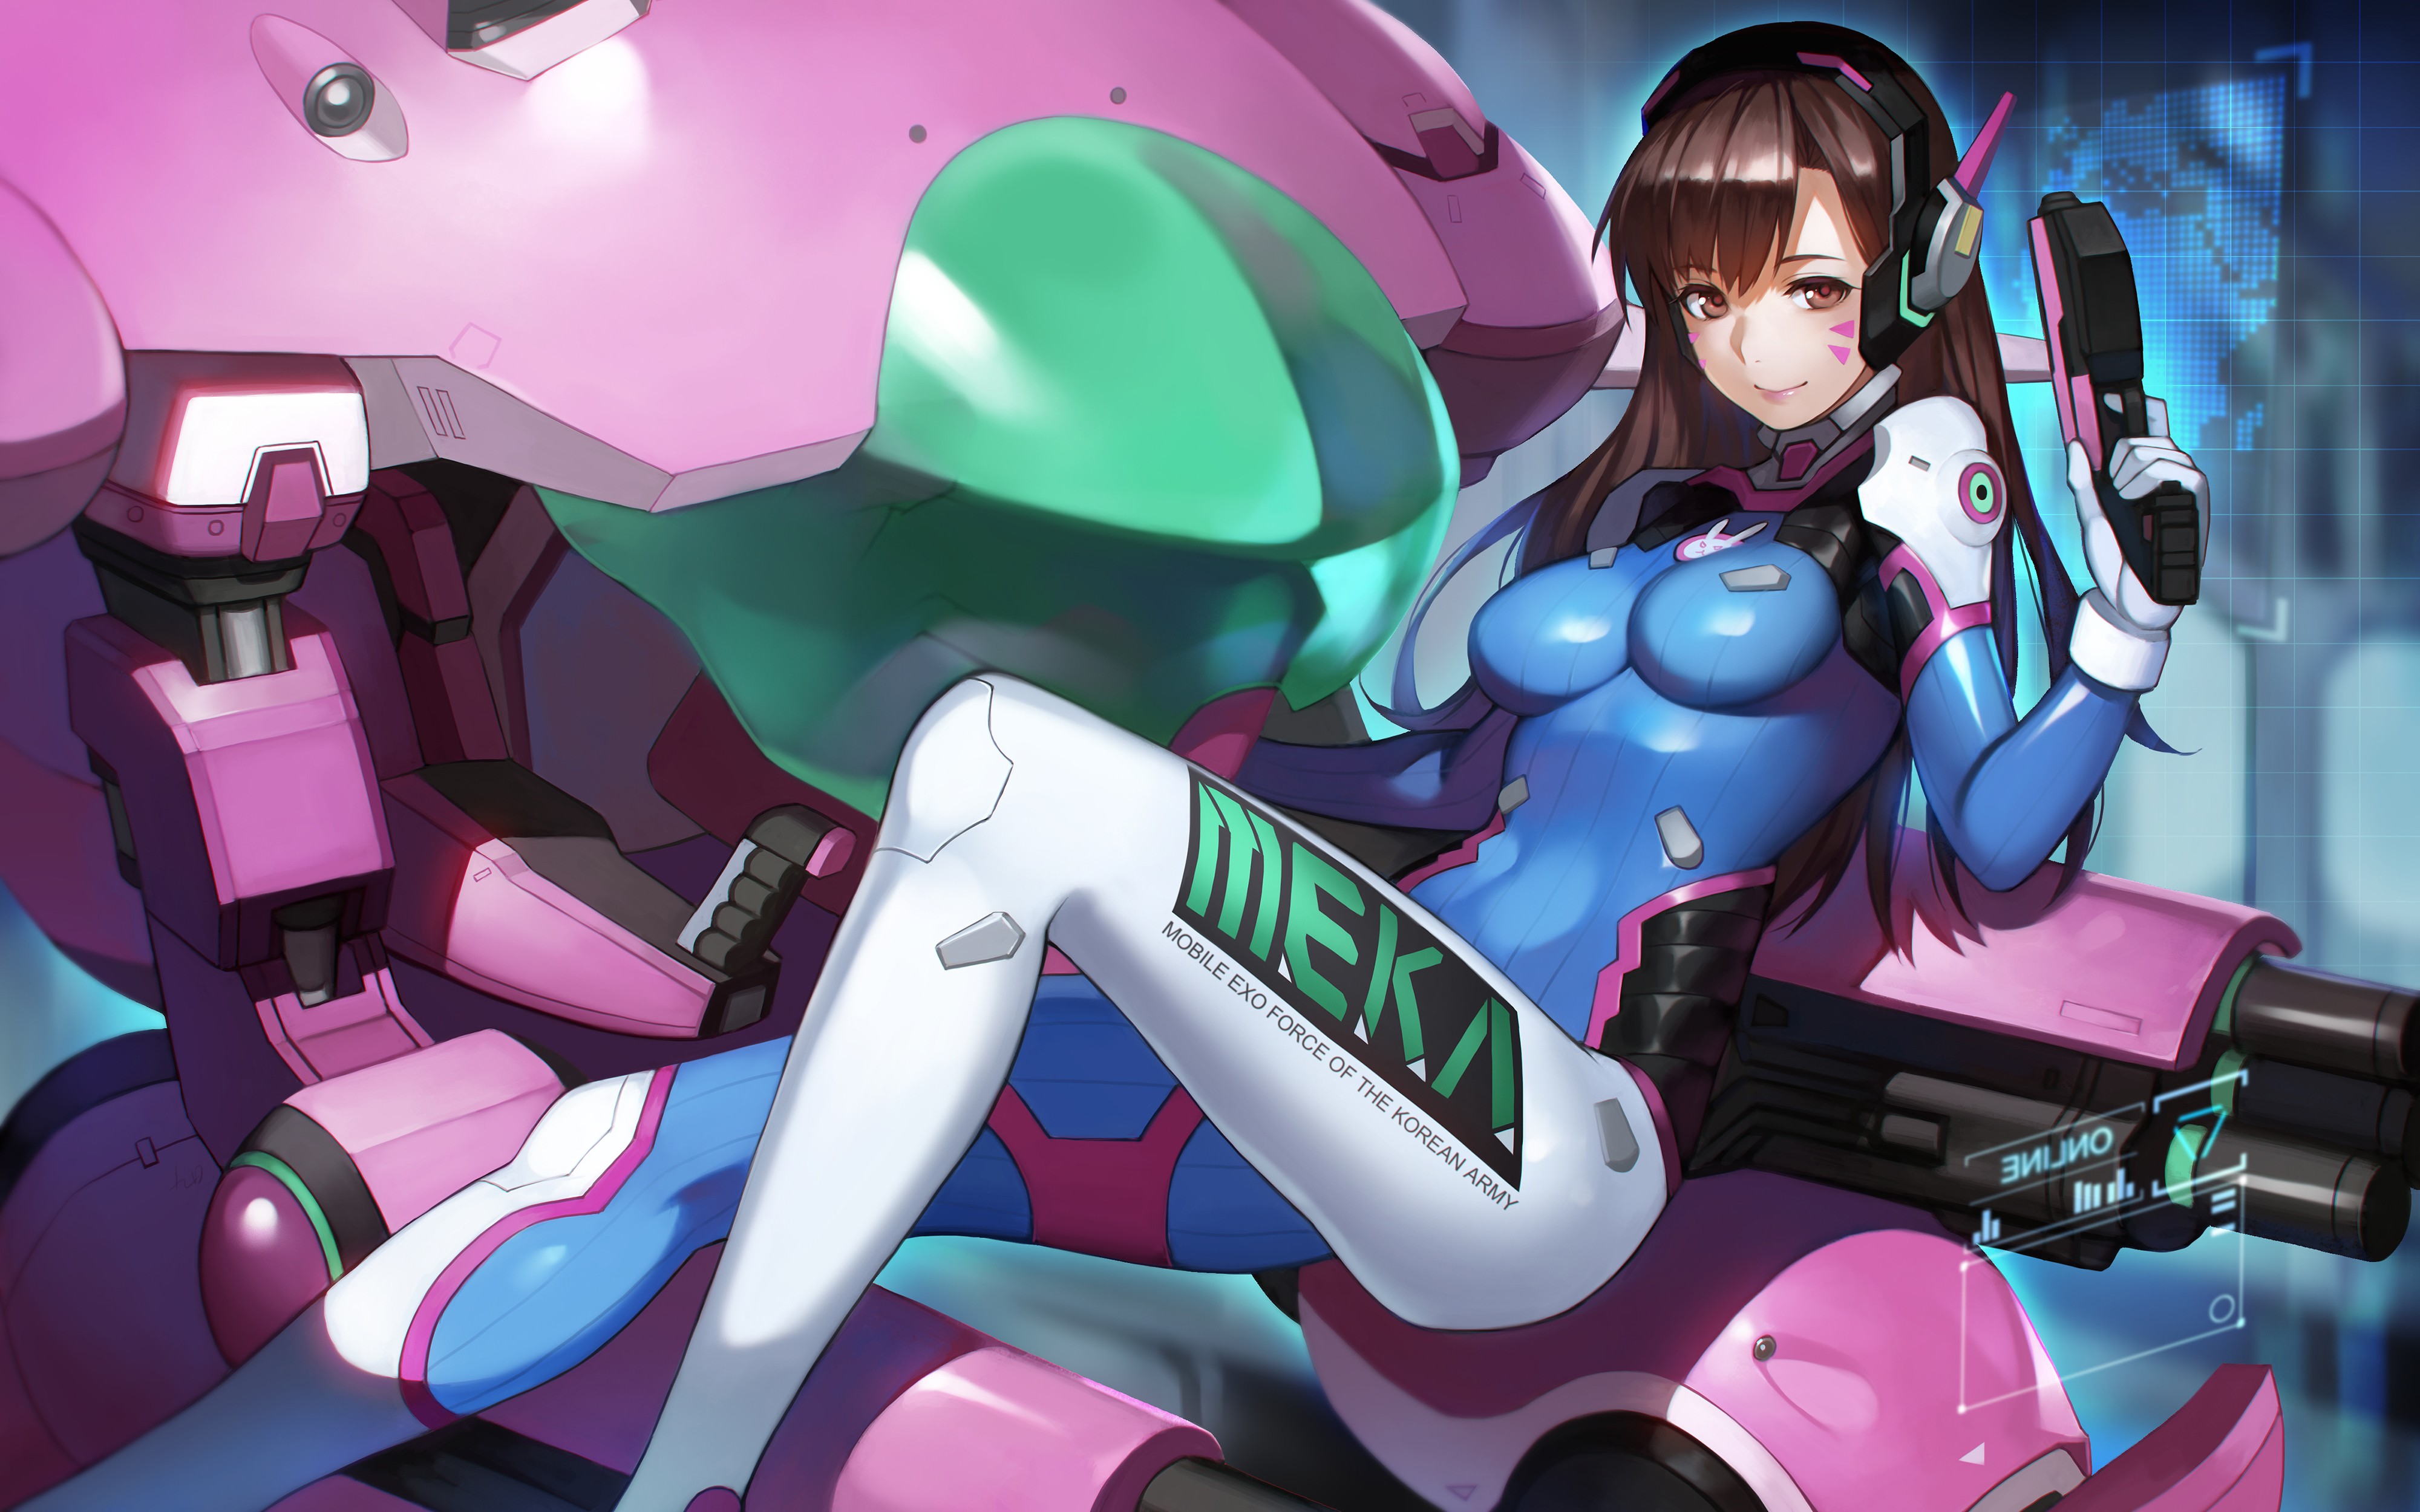 Anime 4000x2500 Overwatch D.Va (Overwatch) anime anime girls fan art Pixiv video game girls girls with guns boobs smiling PC gaming looking at viewer science fiction science fiction women brunette long hair video game characters